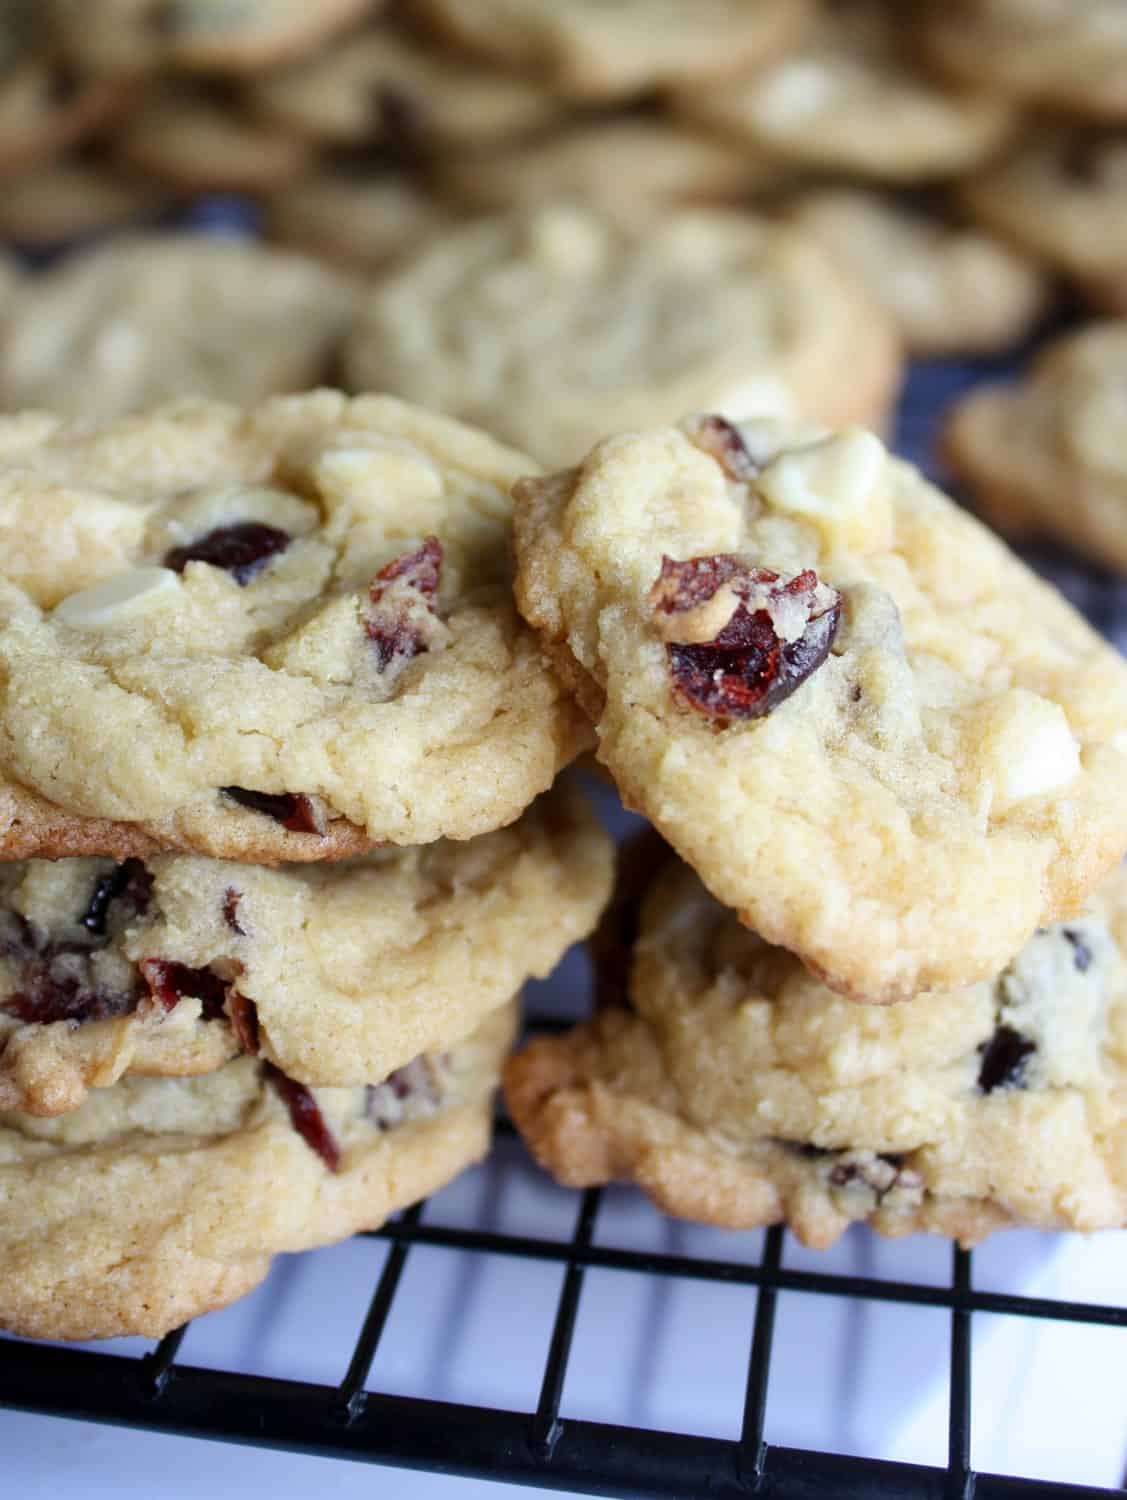 White Chocolate Cranberry Cookies are a tasty, chewy alternative to the classic chocolate chip cookie. The dried cranberries add a nice pop of colour for the holiday season.